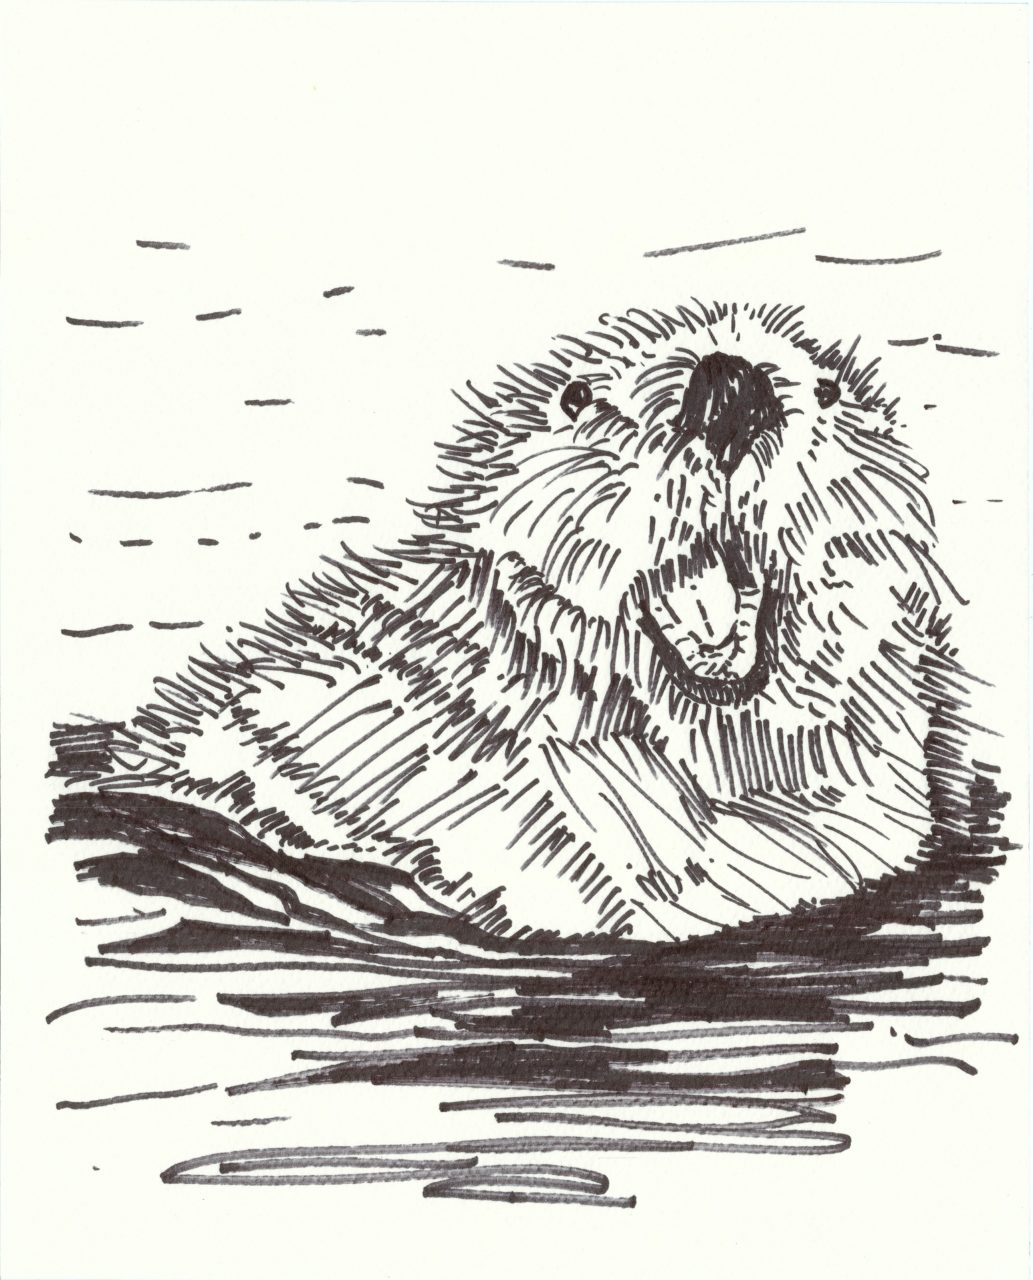 A Drawing of an Otter